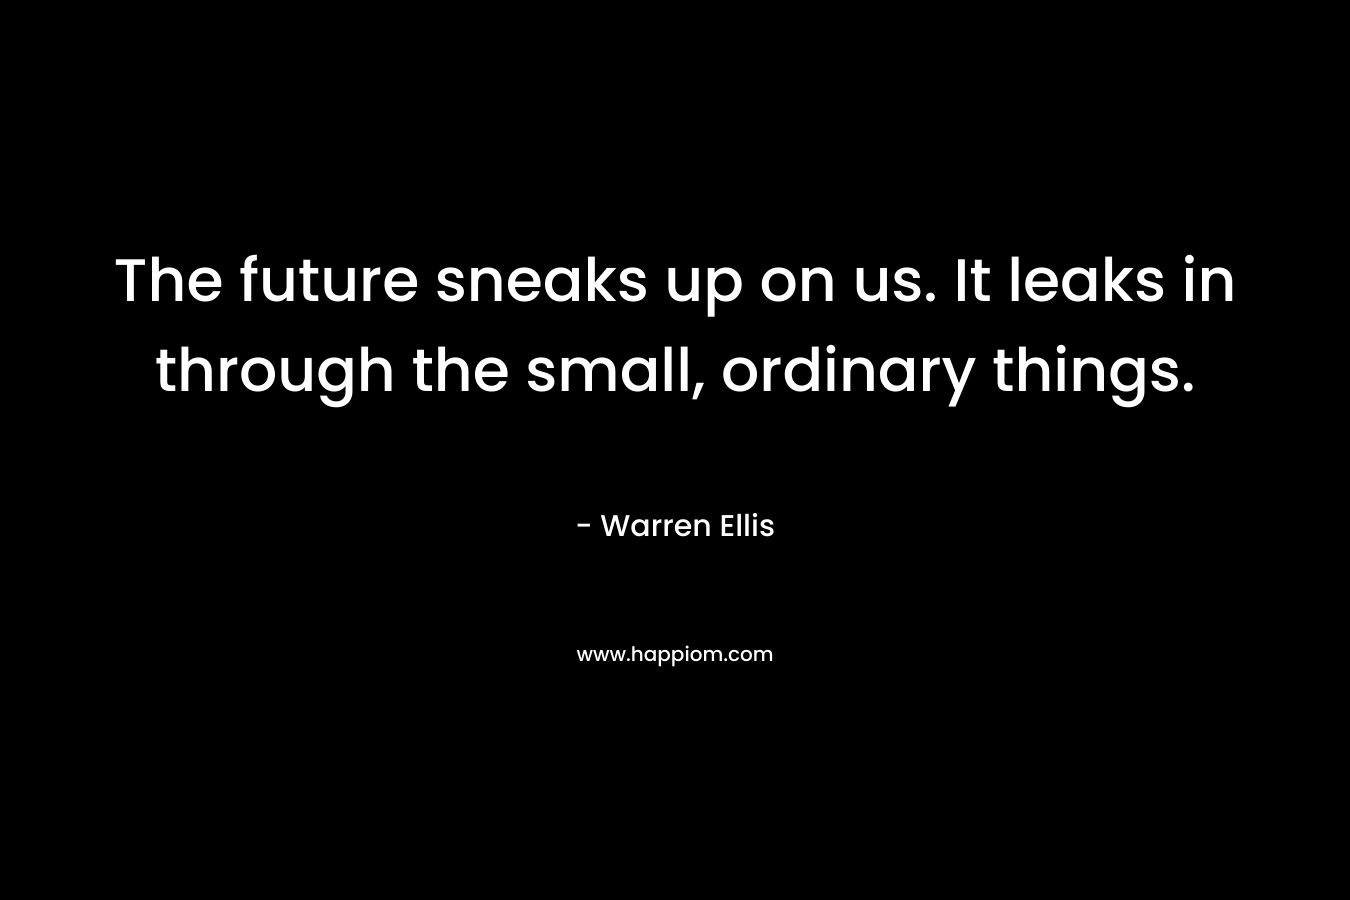 The future sneaks up on us. It leaks in through the small, ordinary things.